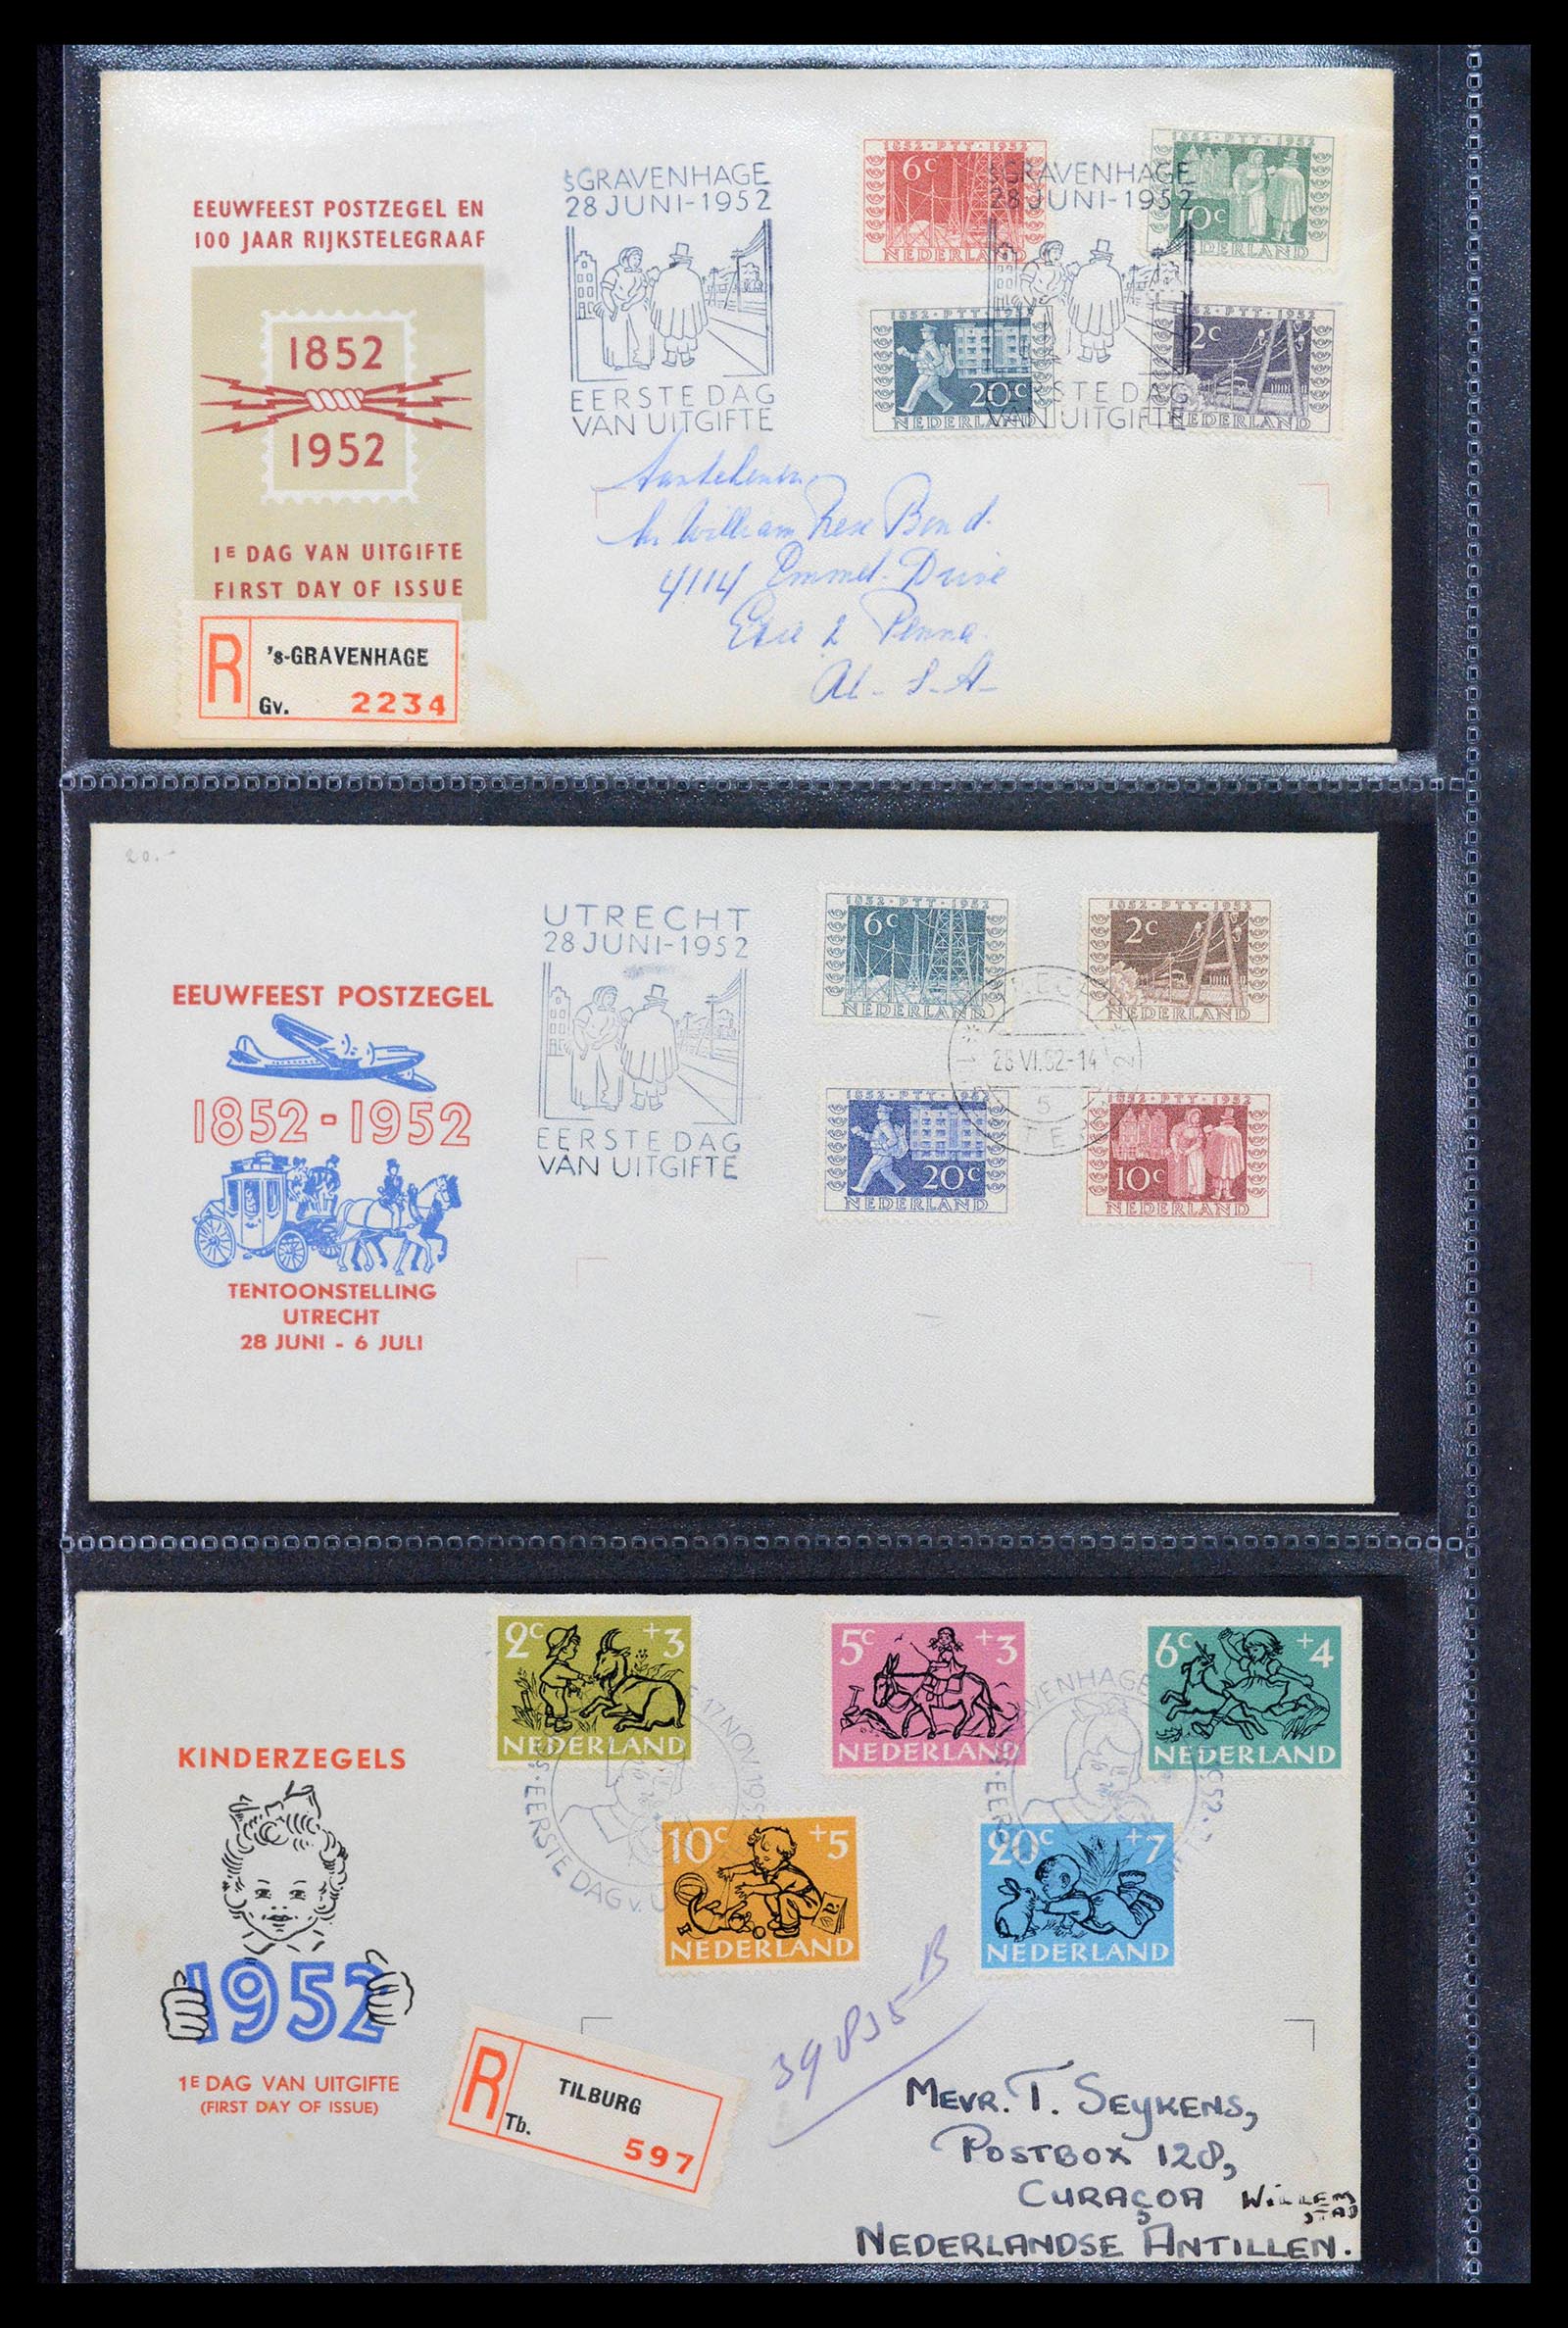 39041 0004 - Stamp collection 39041 Netherlands first day covers 1950-1977.